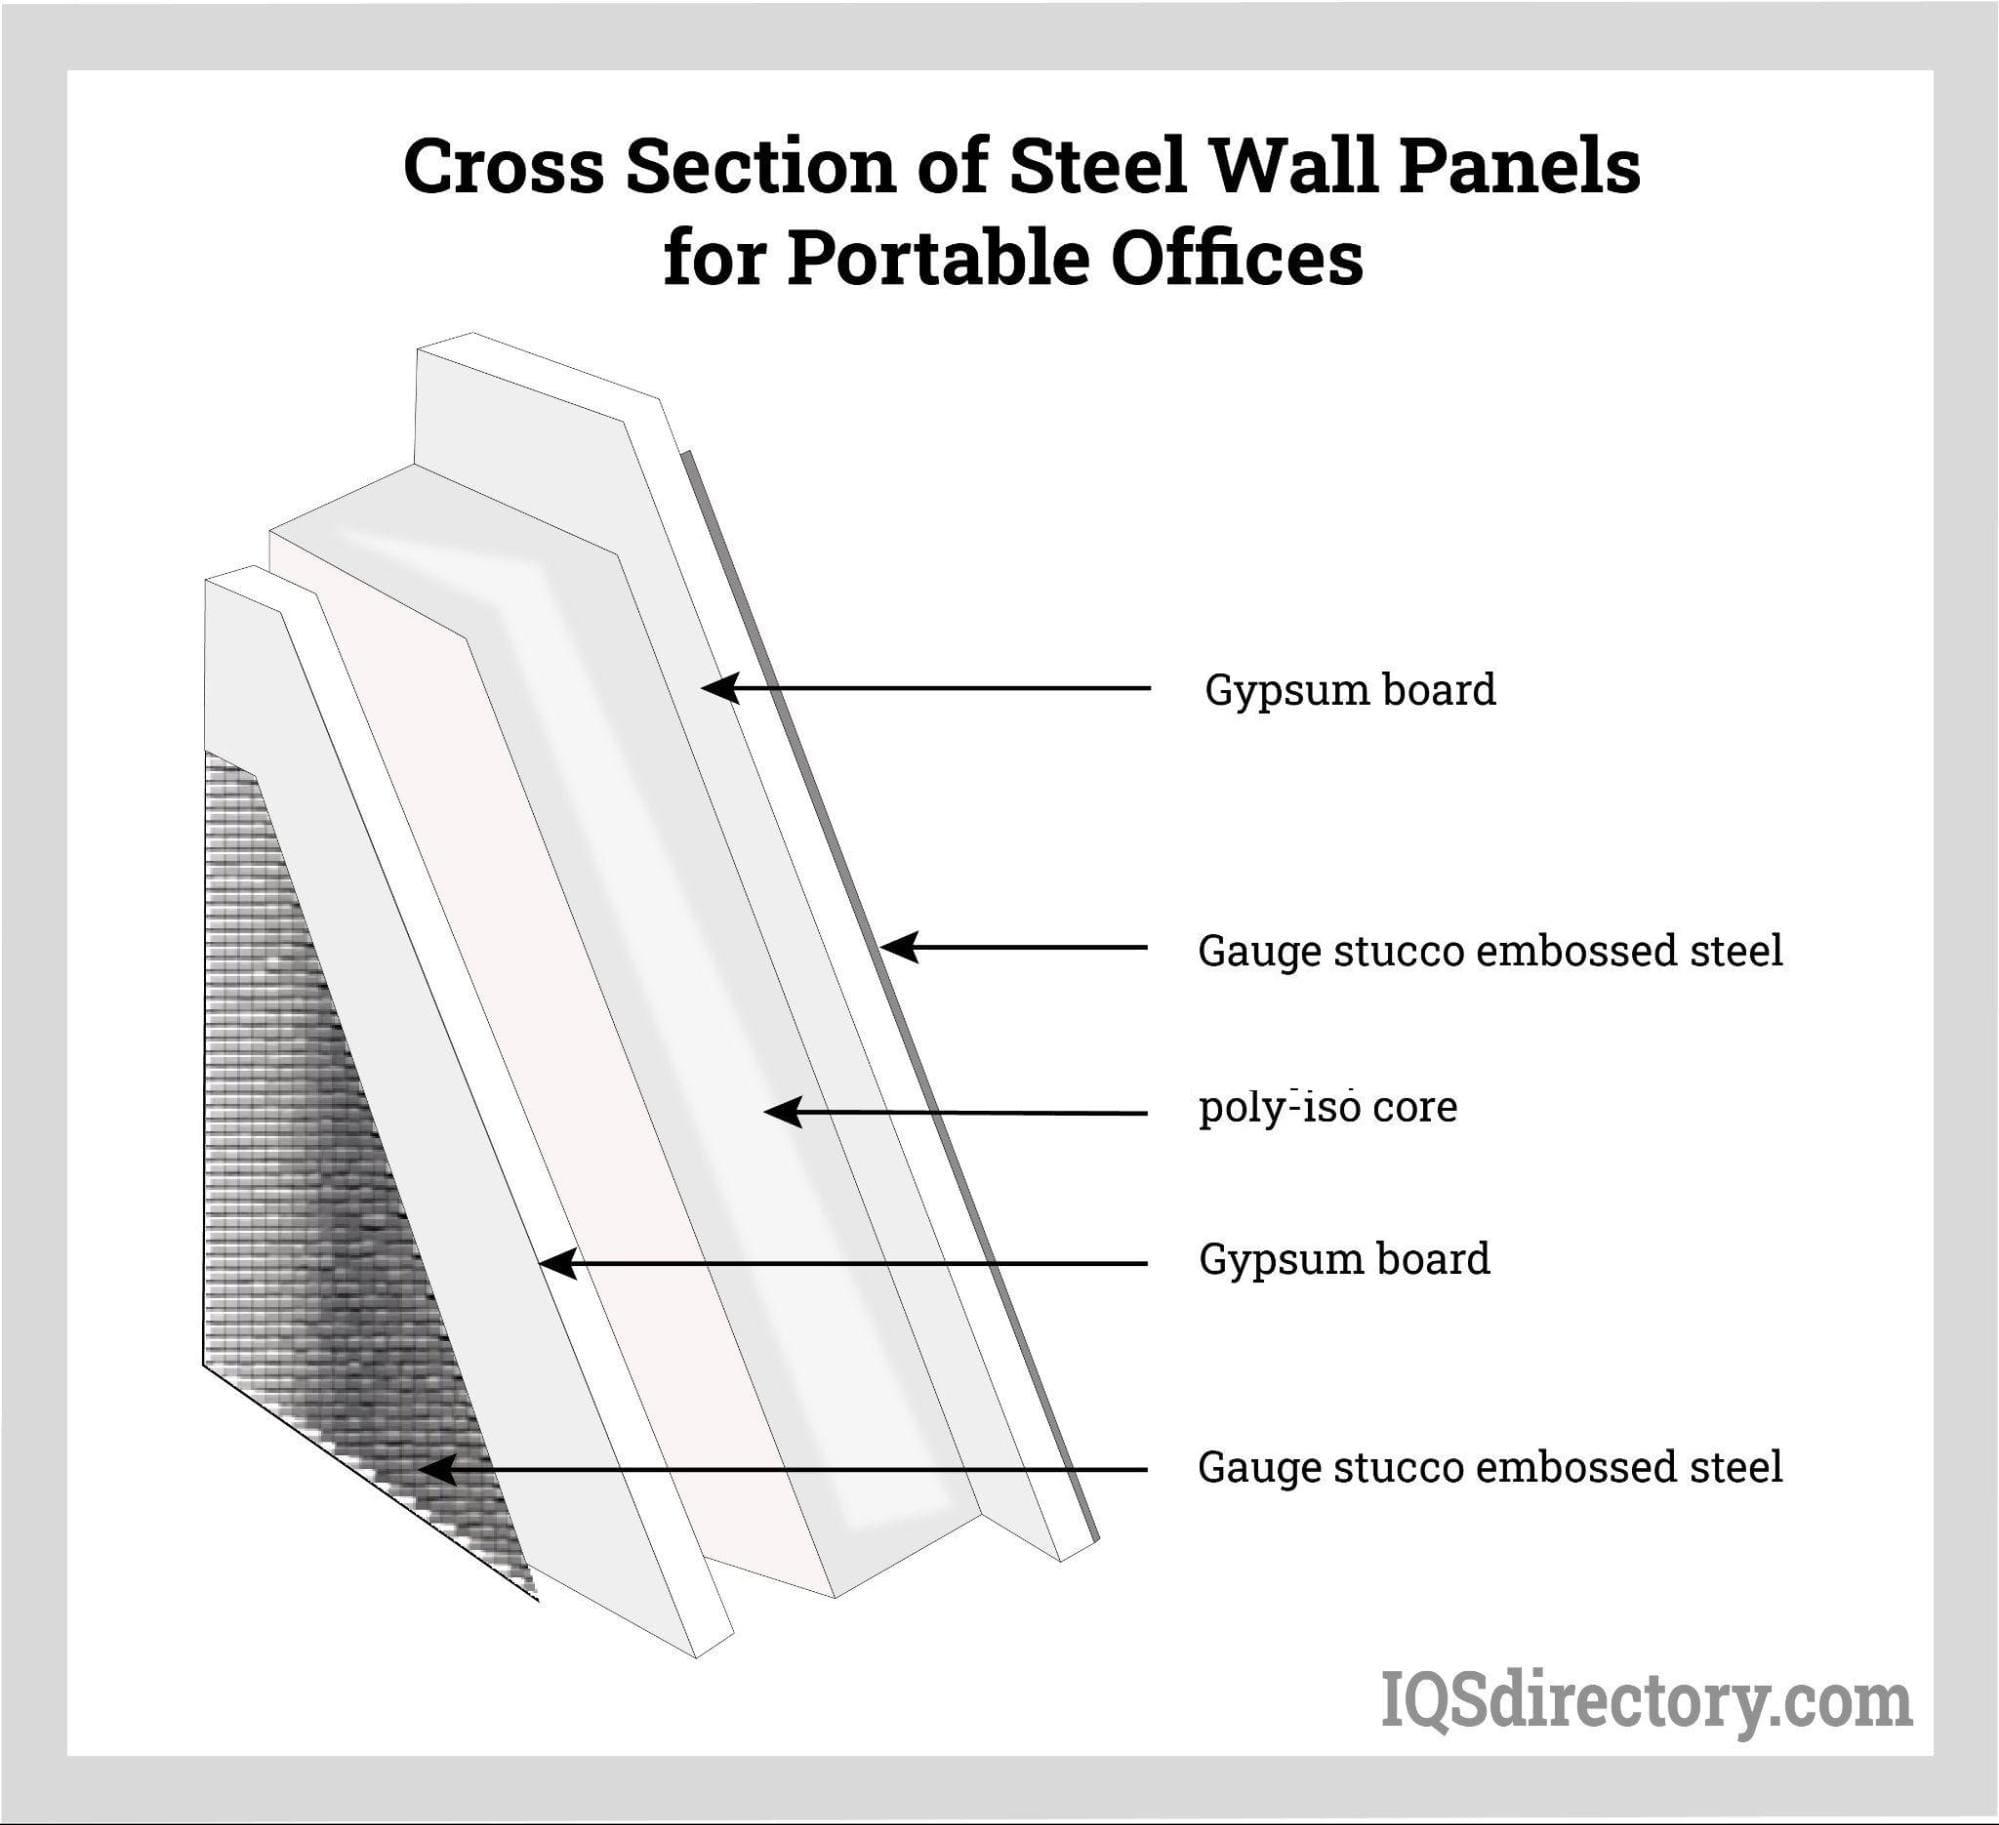 Cross Section of a Ballistic Portable Office Panel